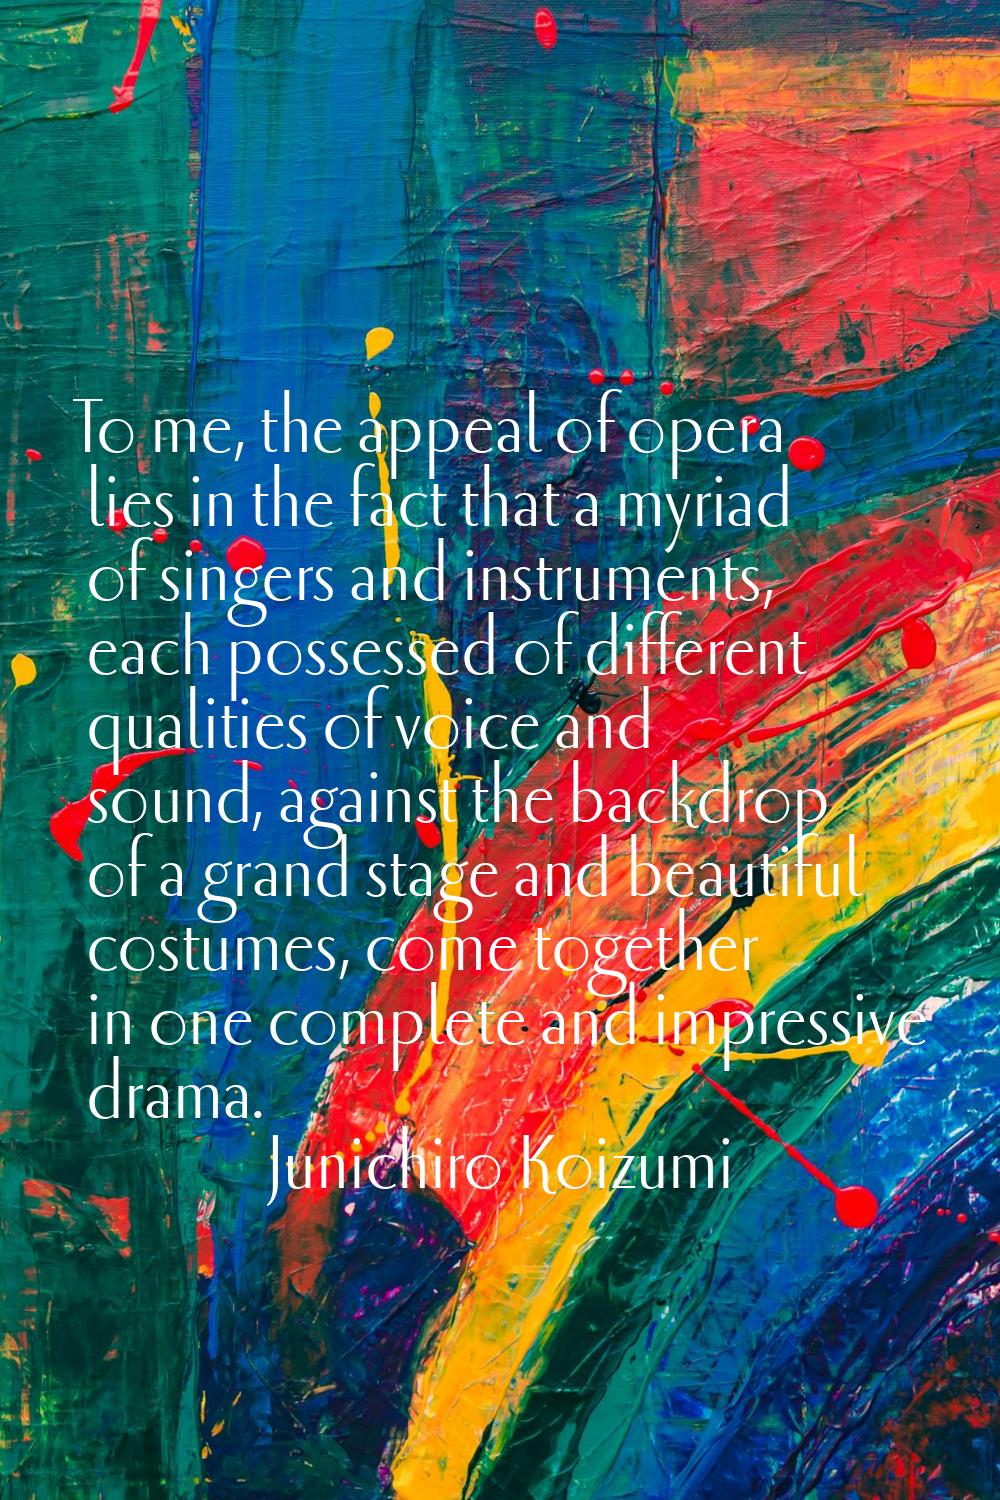 To me, the appeal of opera lies in the fact that a myriad of singers and instruments, each possesse